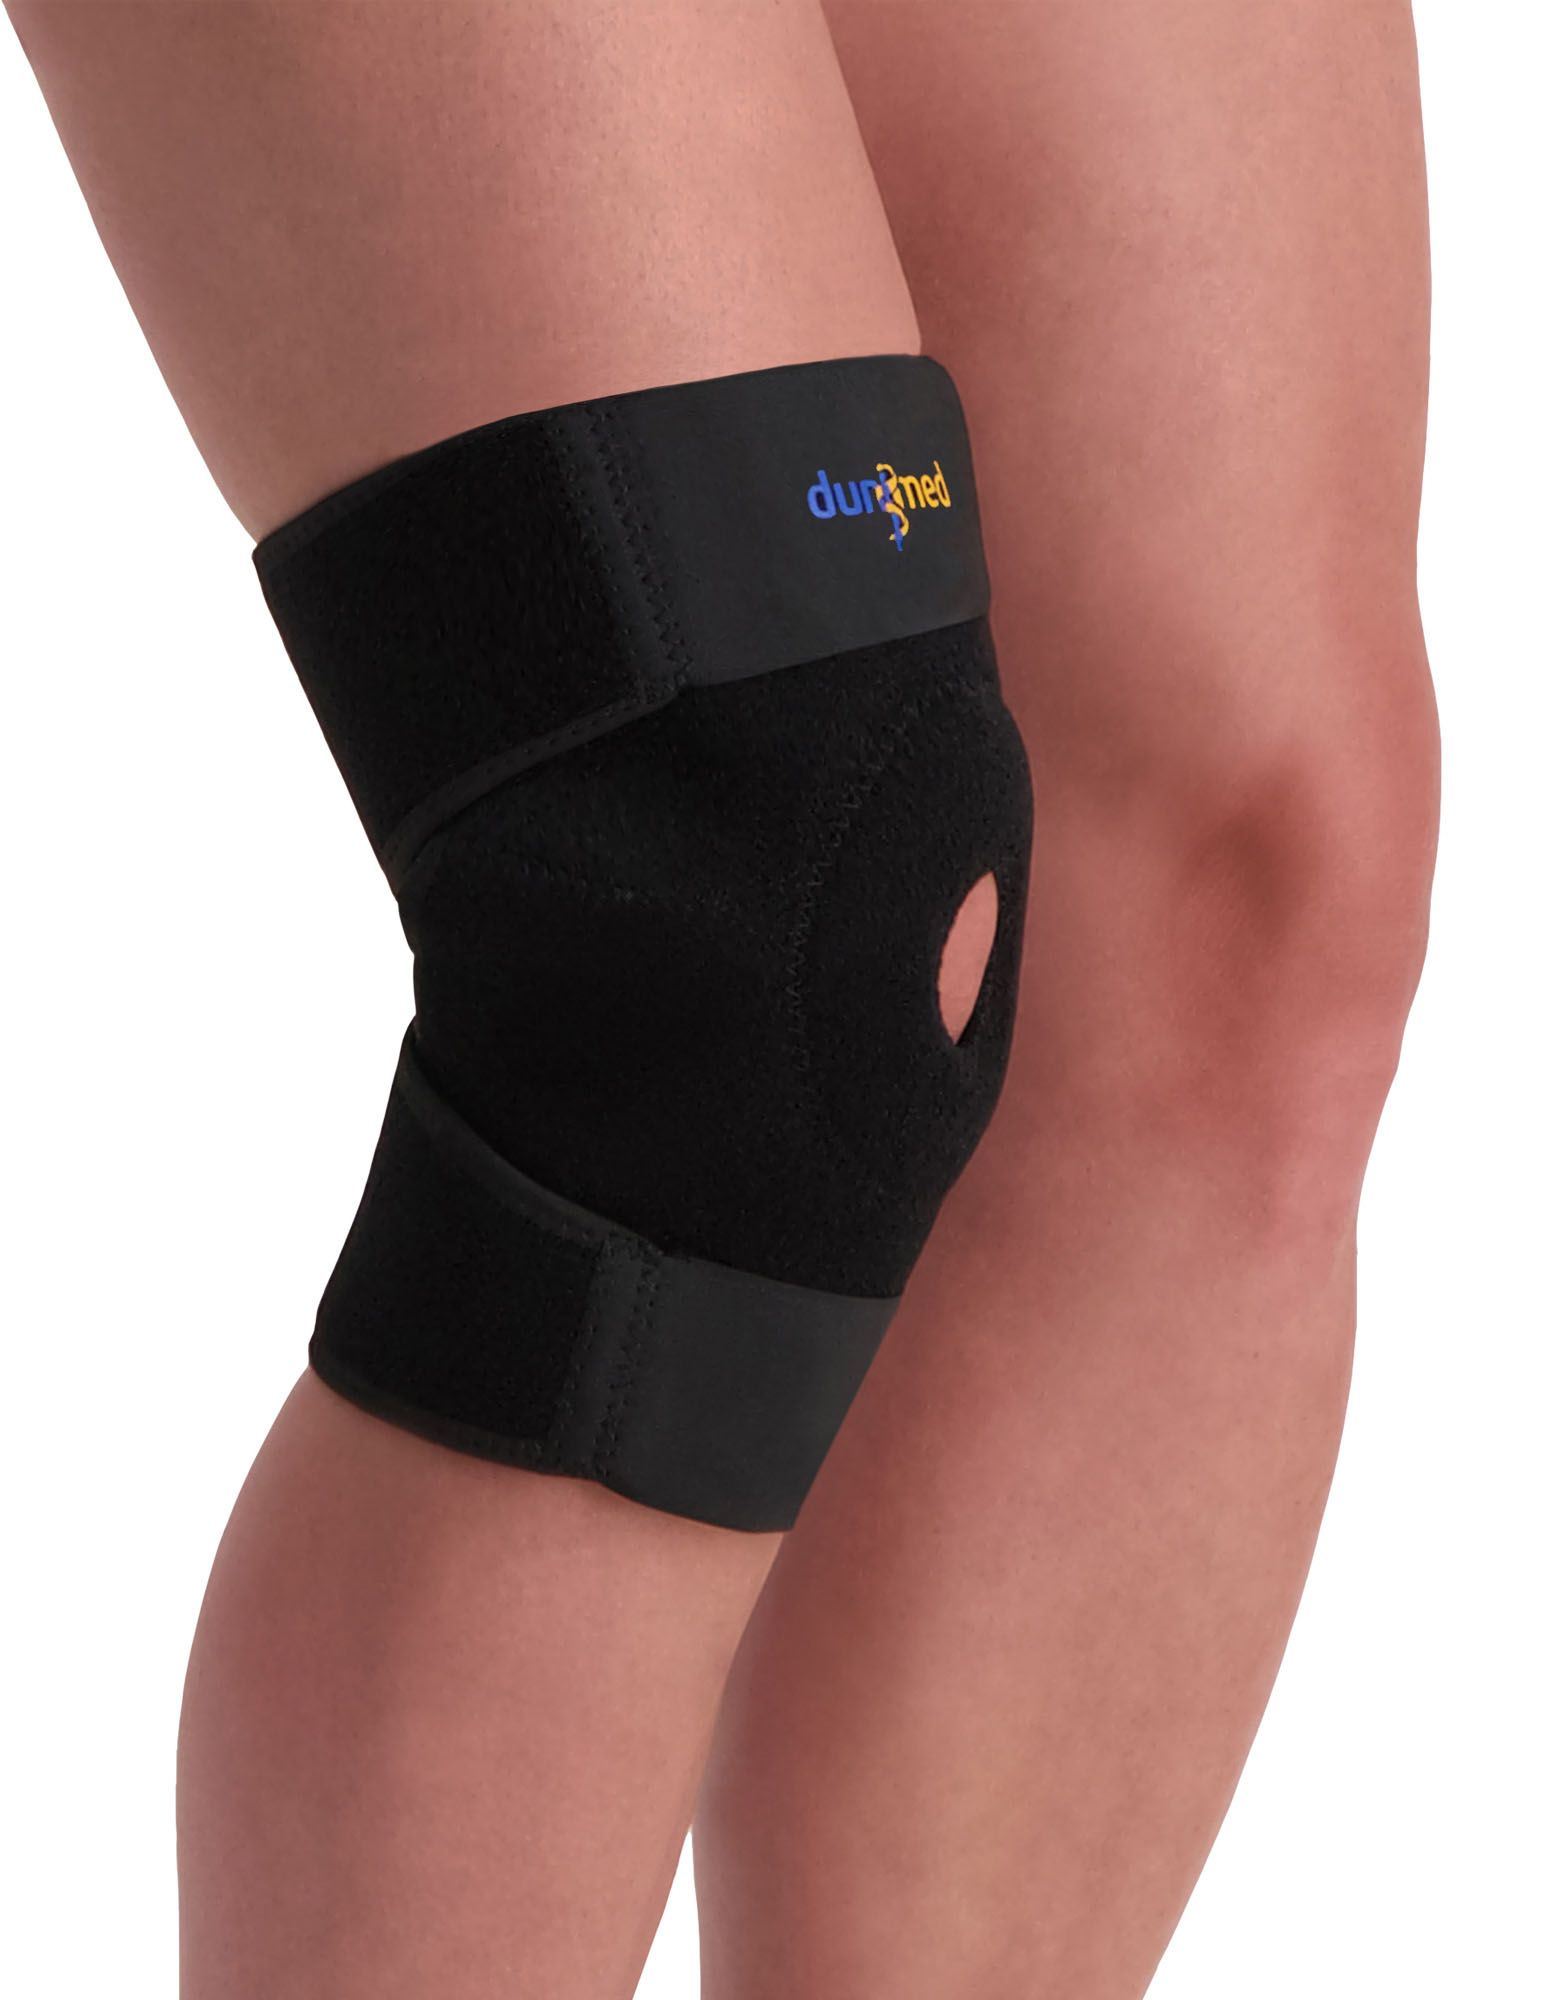 dunimed knee support wrap for sale